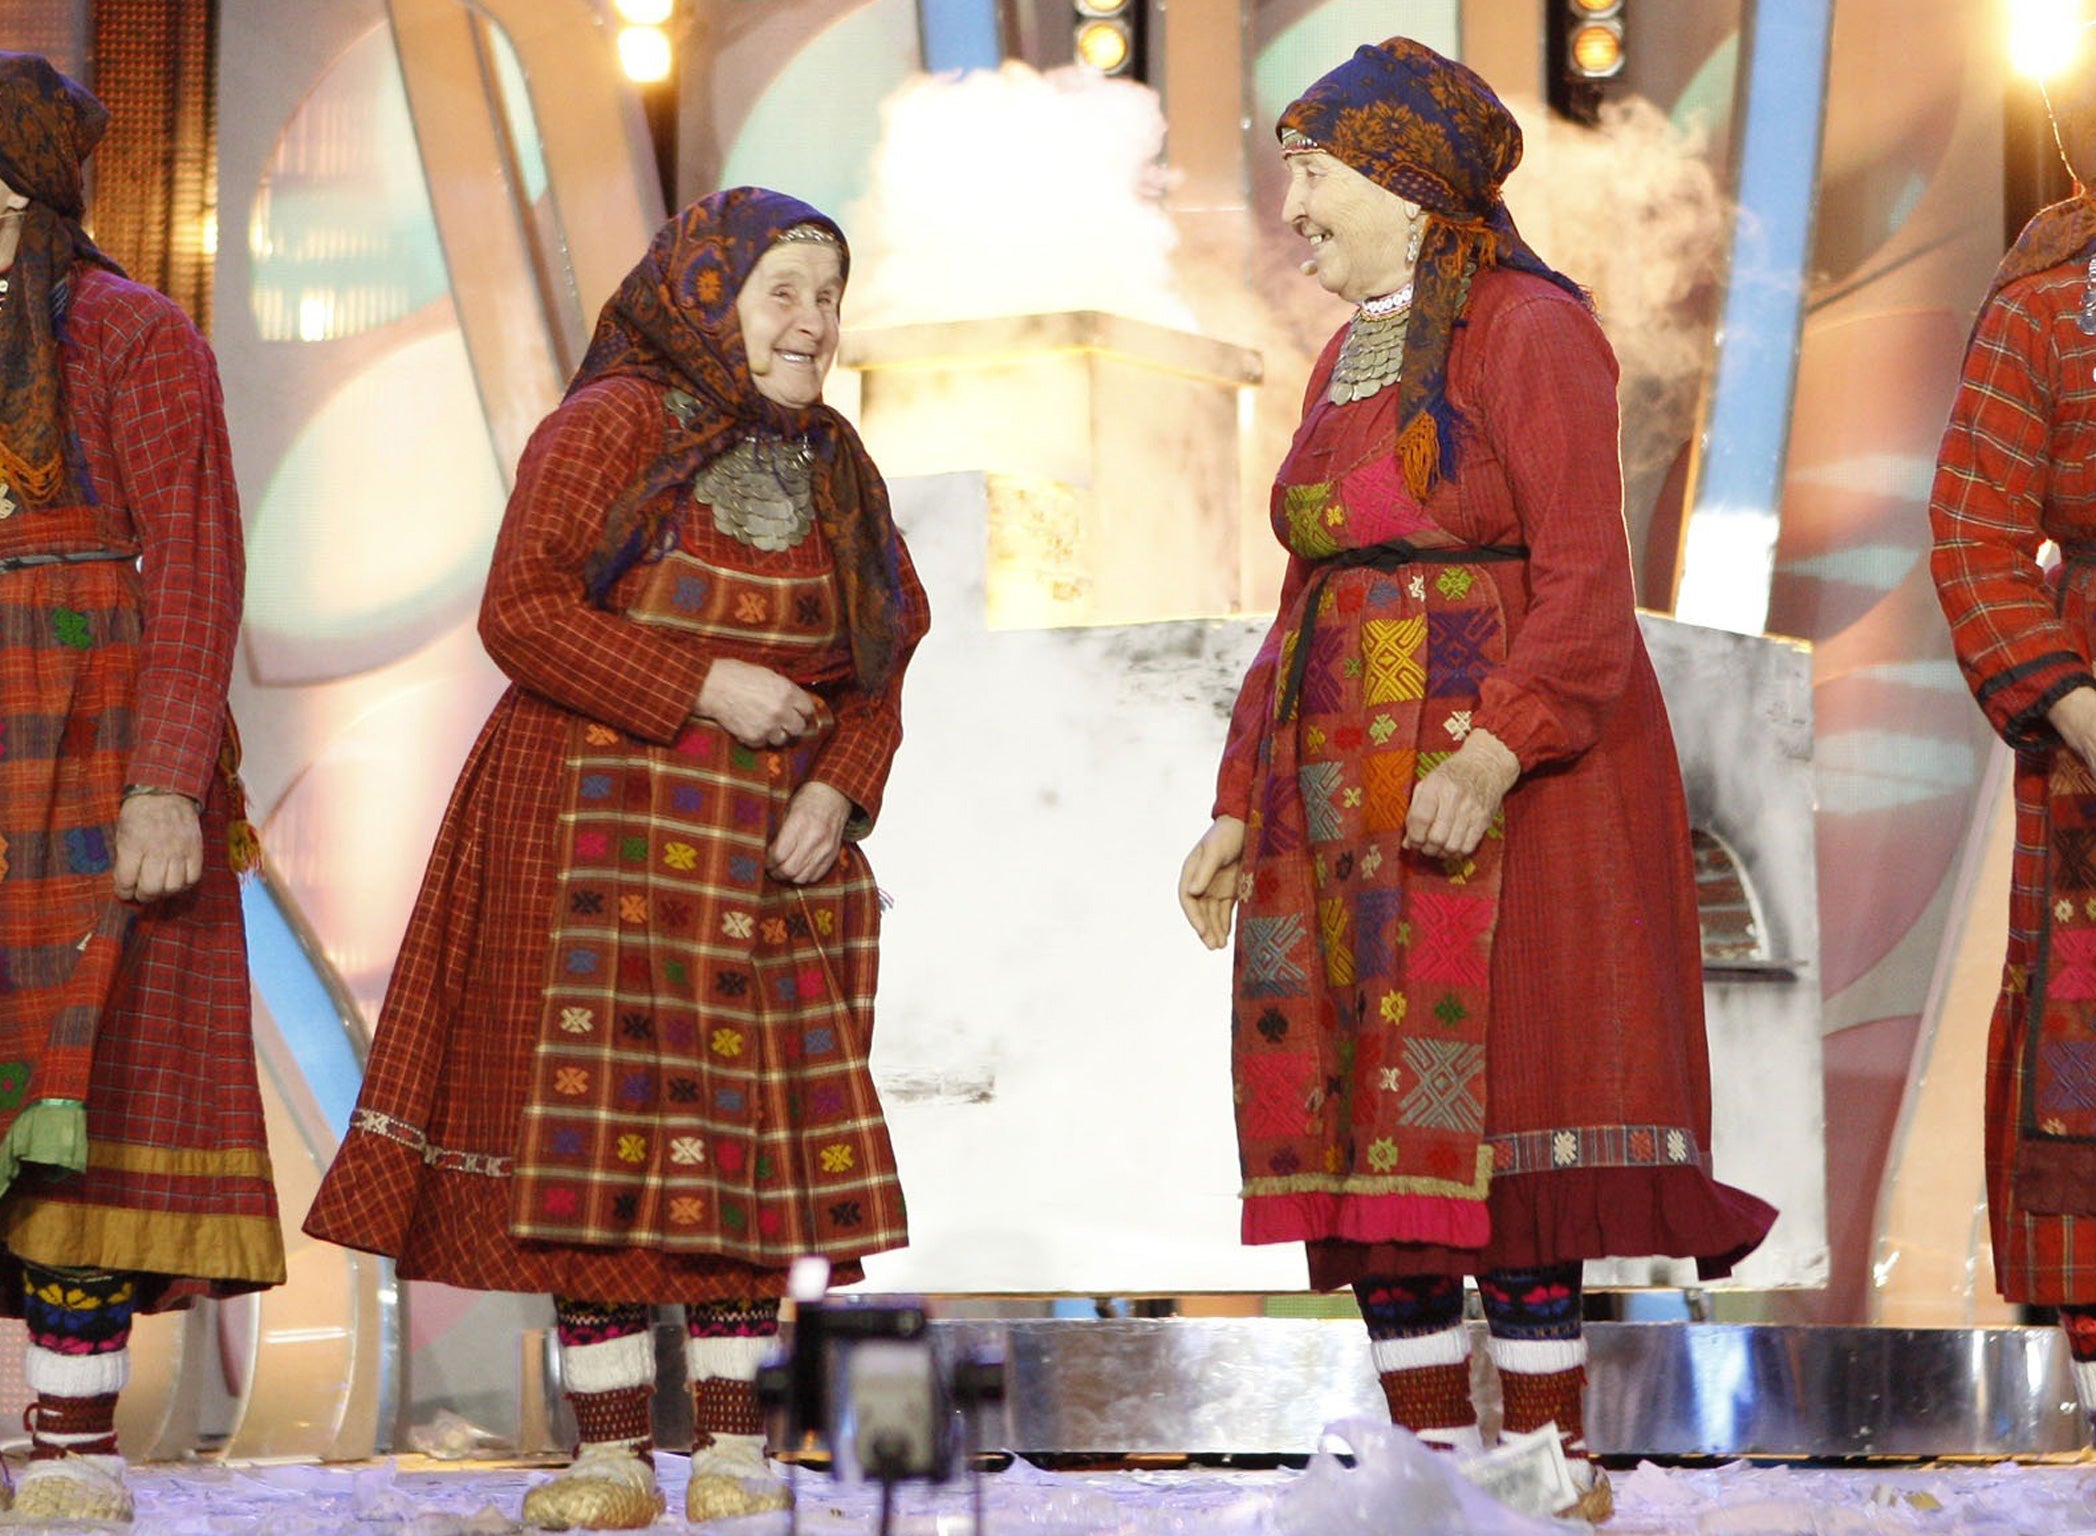 The Buranovo Grannies performing at the 2012 Eurovision song contest in Moscow